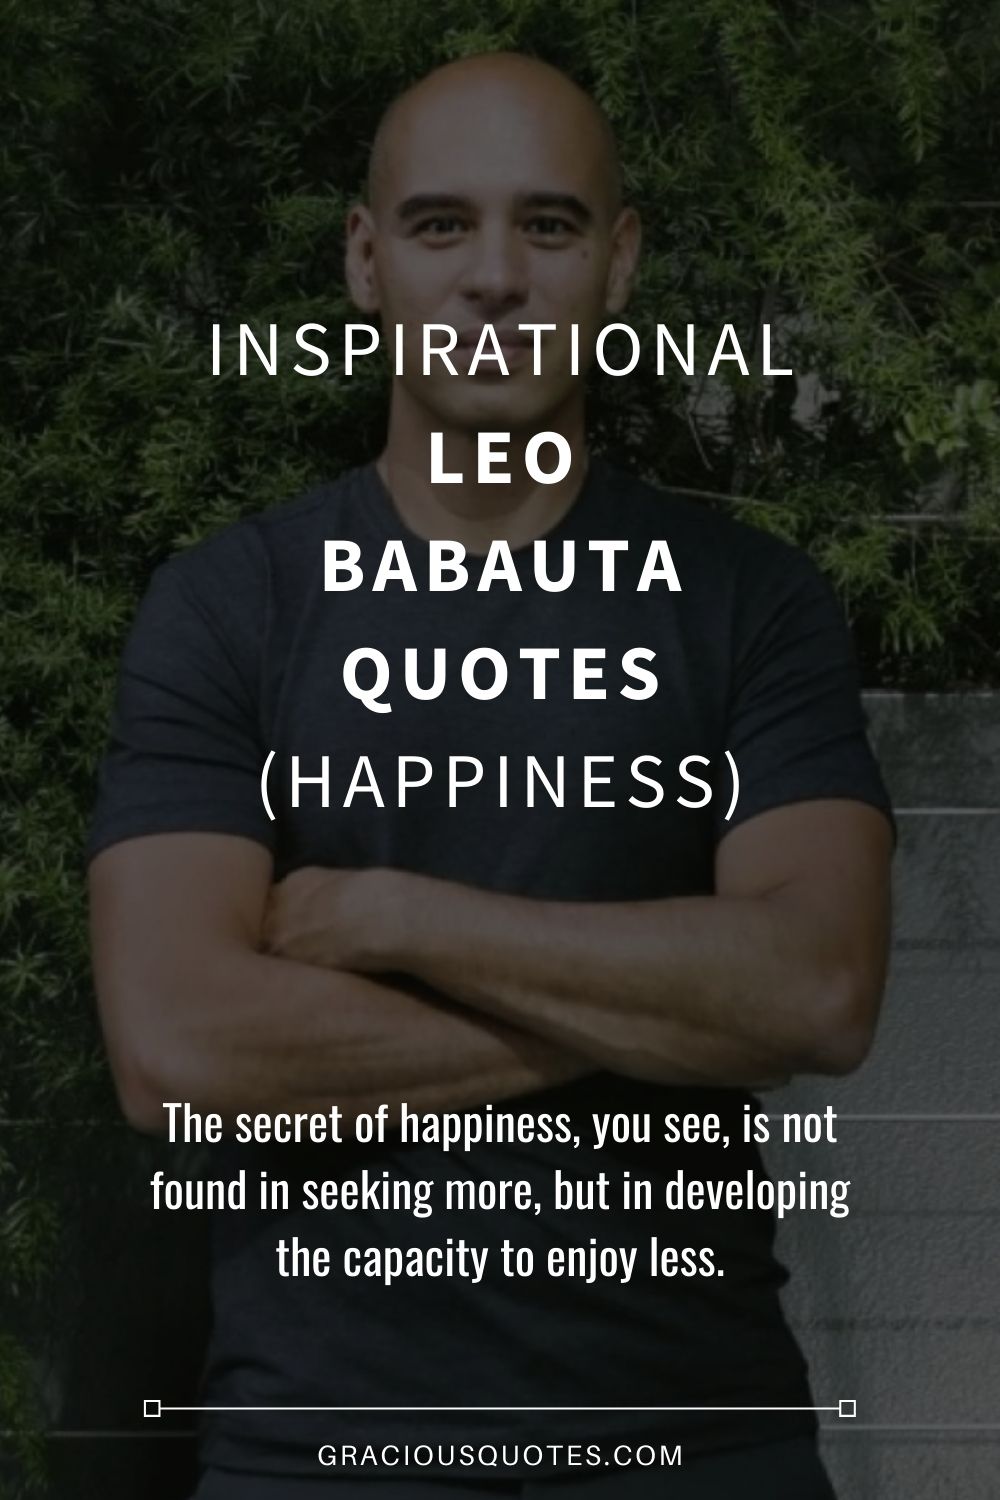 Inspirational Leo Babauta Quotes (HAPPINESS) - Gracious Quotes